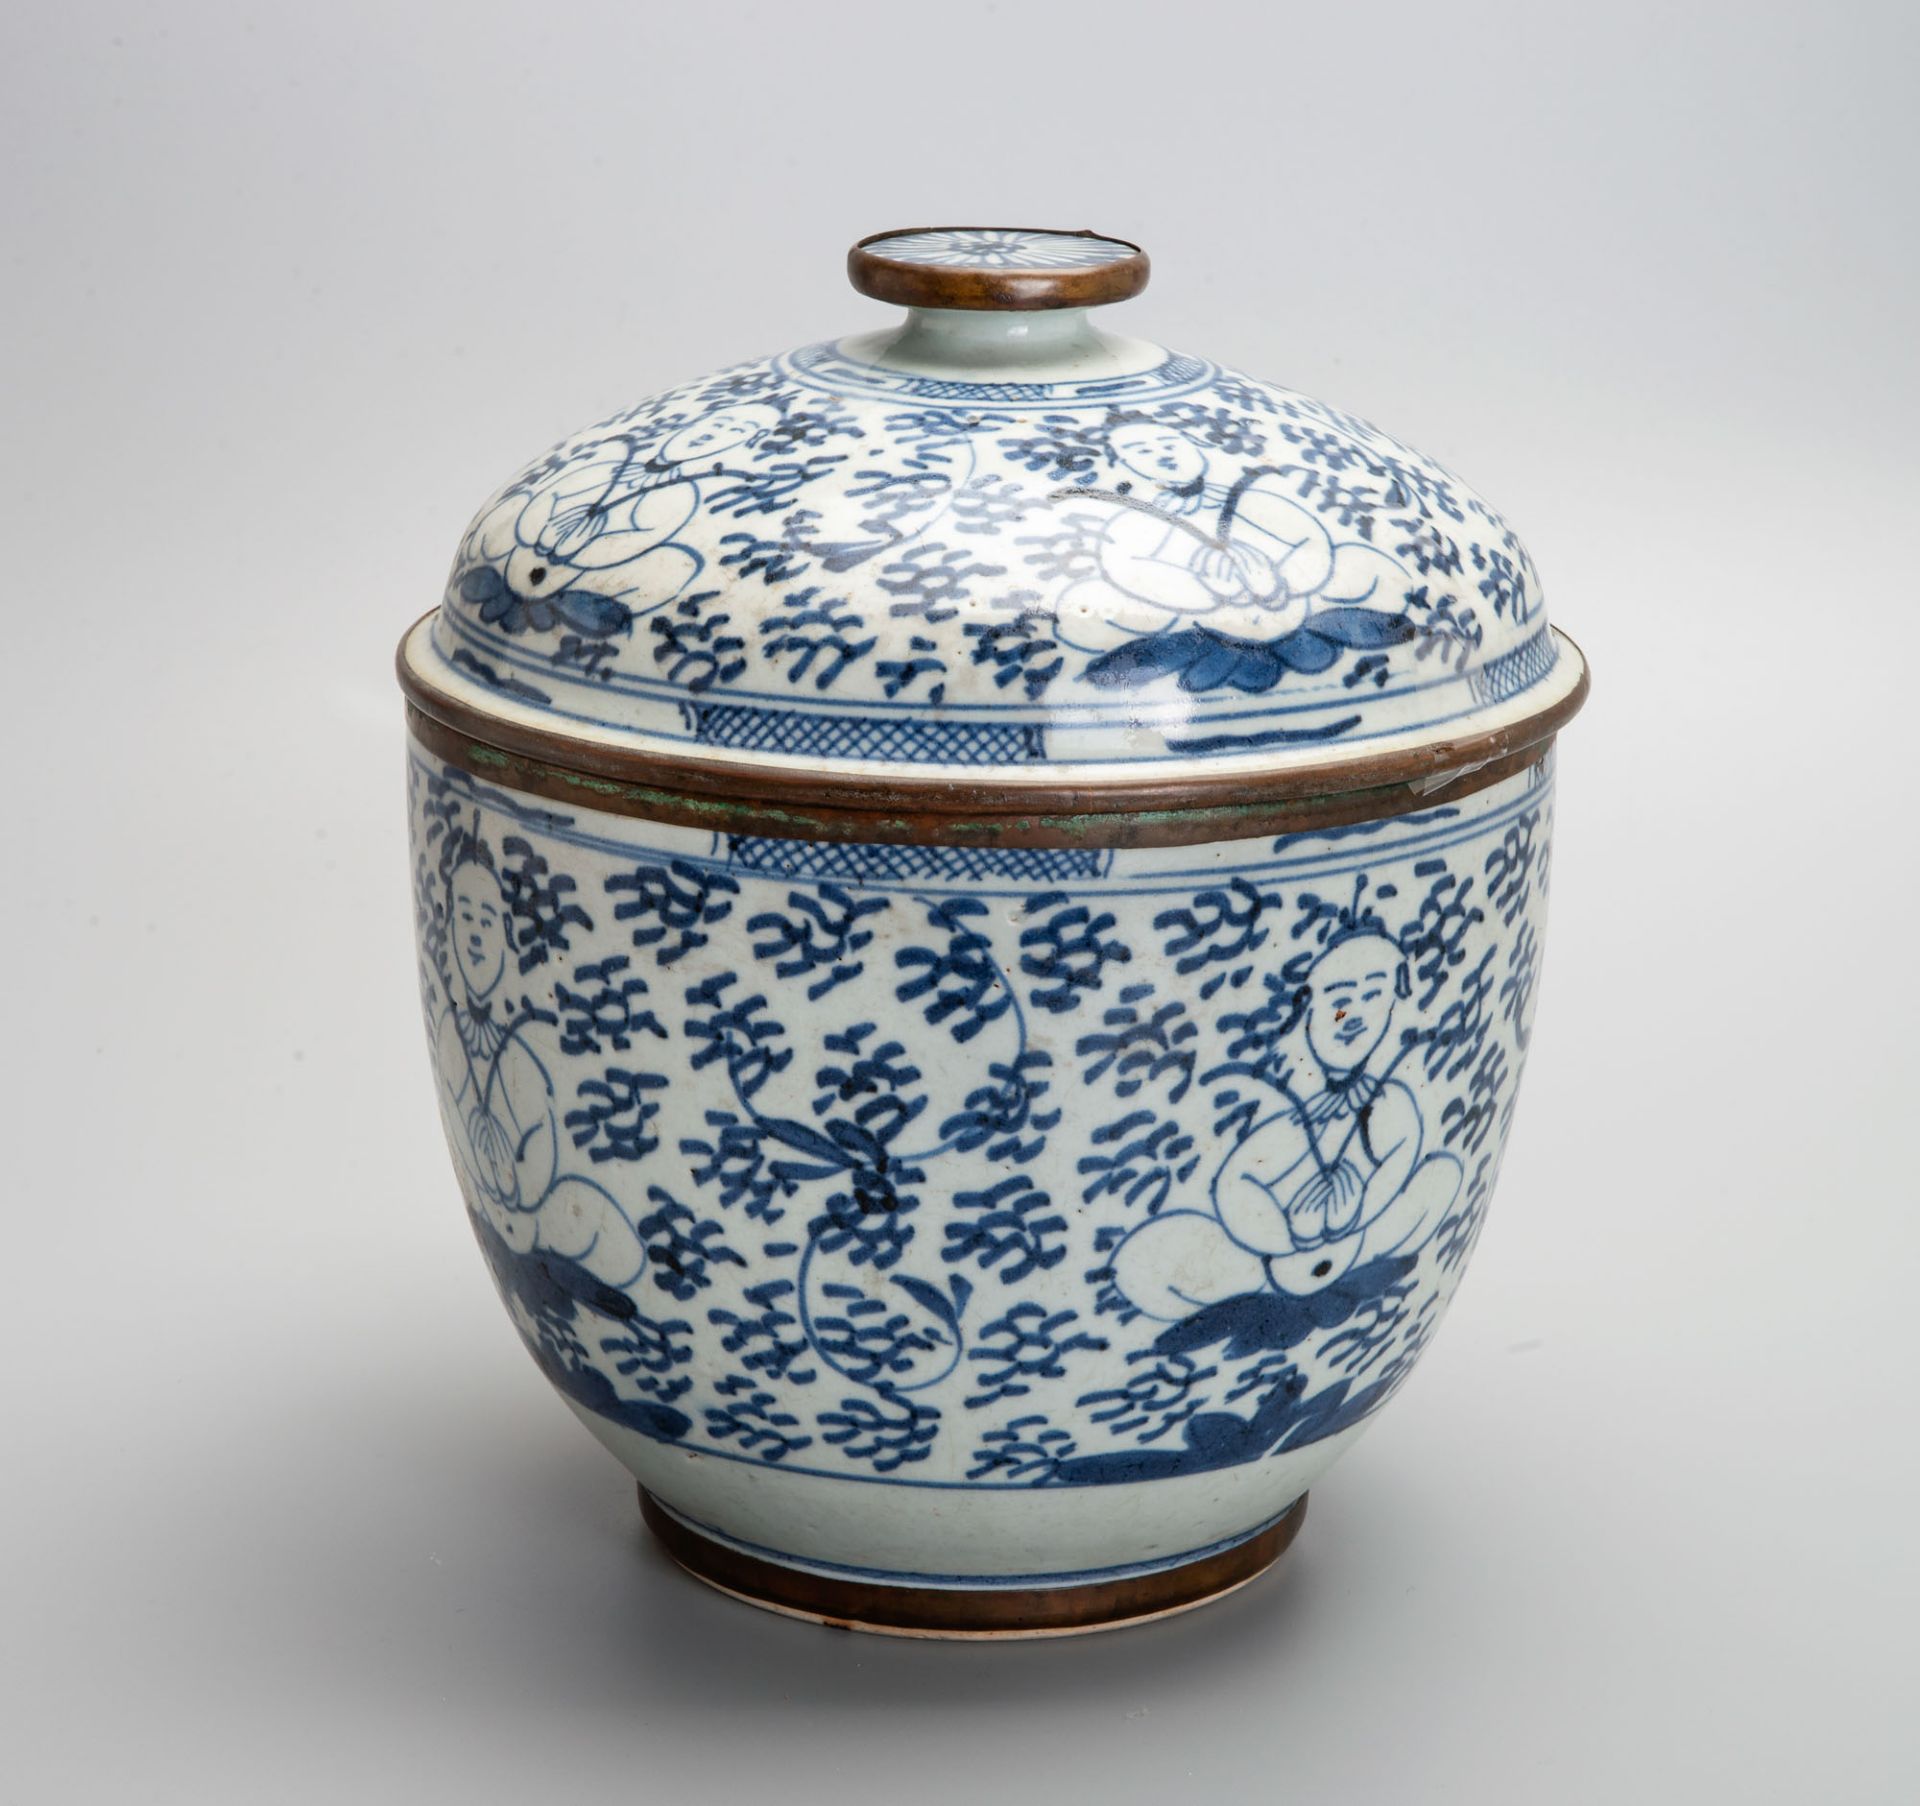 A Rare Blue and White Porcelain Lidded Jar, China, Qing Dynasty, 18th century - Image 2 of 5